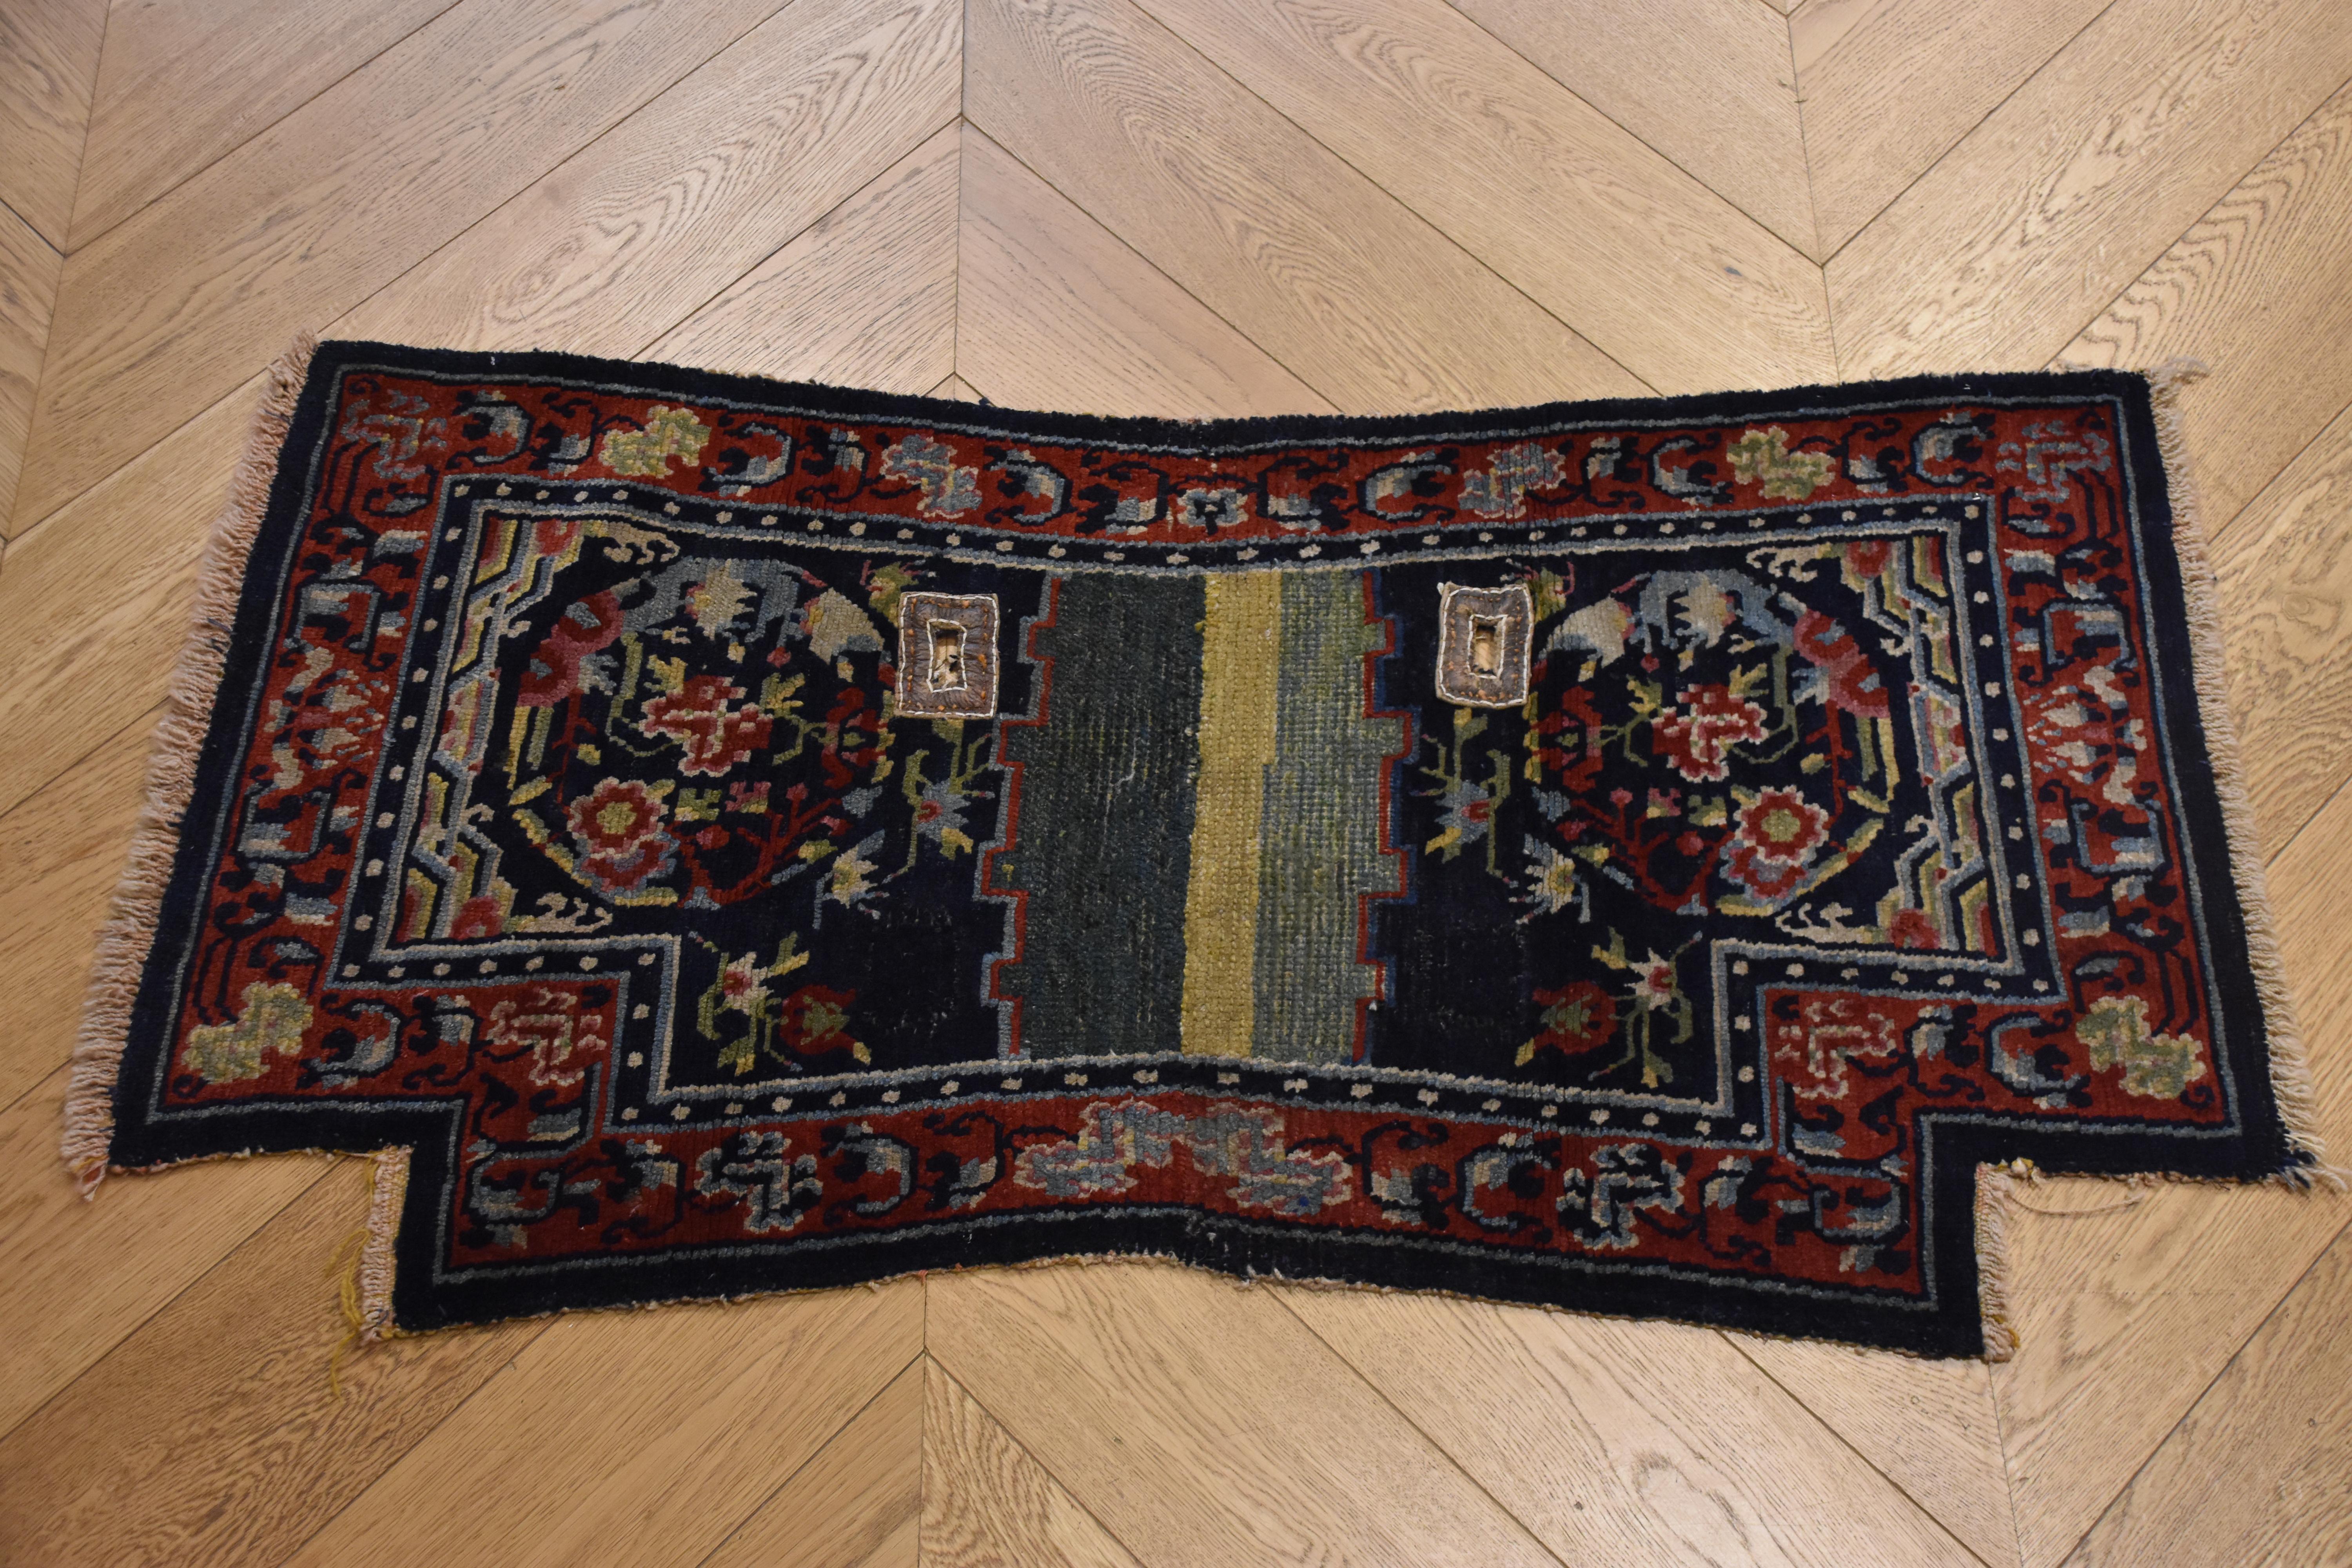 Saddlecloth in Tibetan wool with leather eyelets circa the 1870s. Decorated with floral motifs both in medallions and in rich borders. The peony, which is depicted in the medallions, is a symbol of nobility and refinement. In yin and yang, the peony